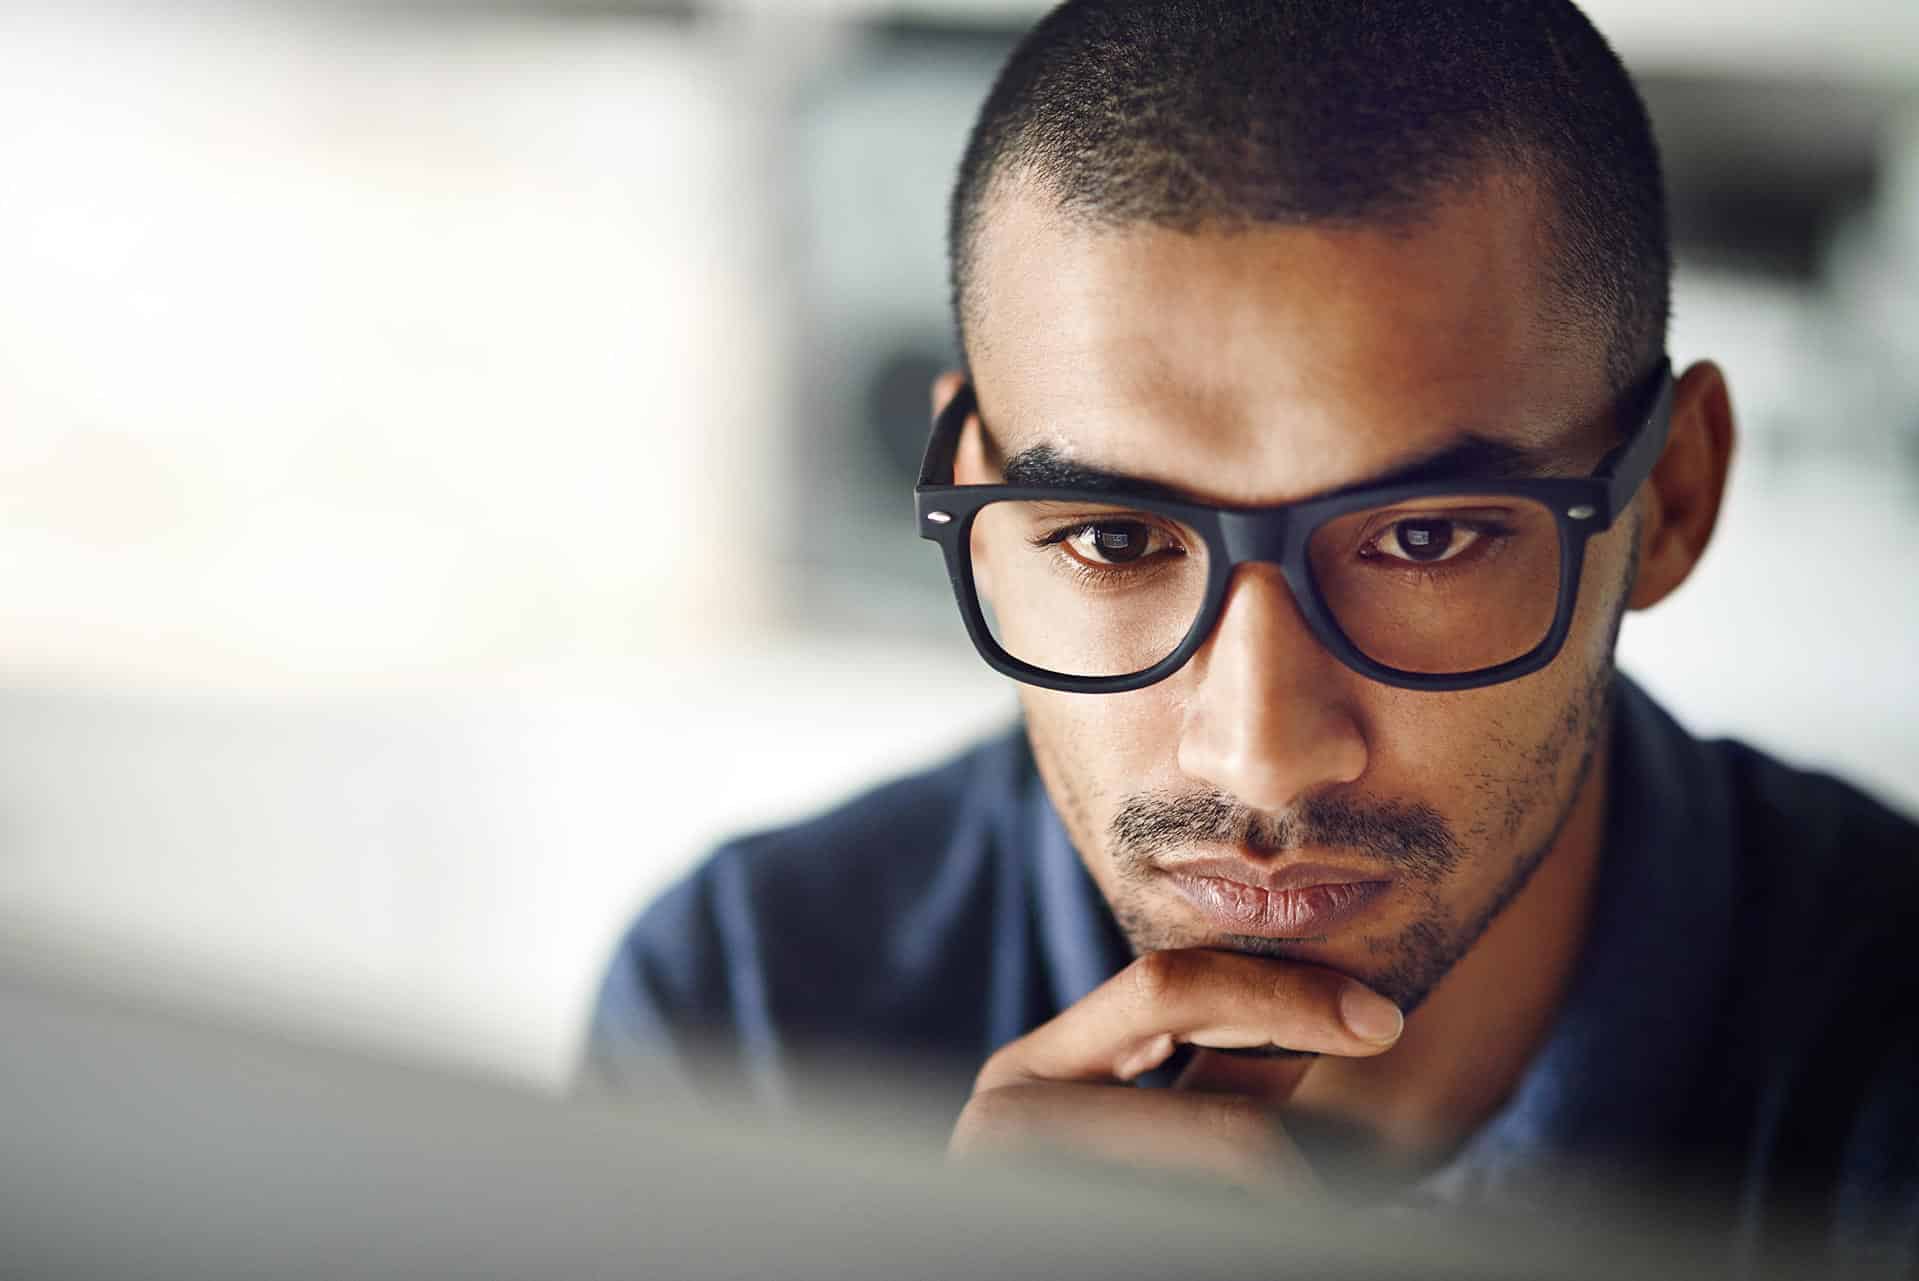 Man staring intently at his work with great concentration